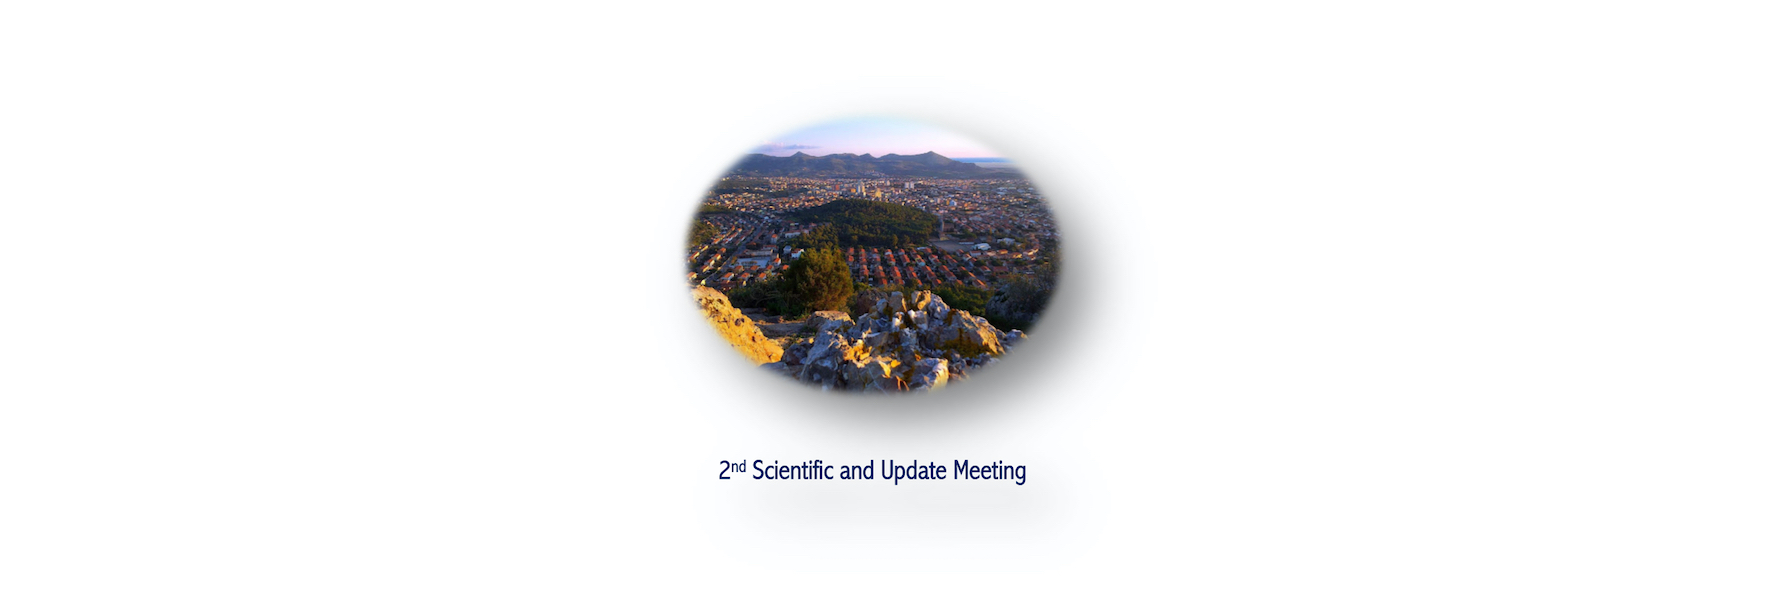 2nd Scientific and Update Meeting